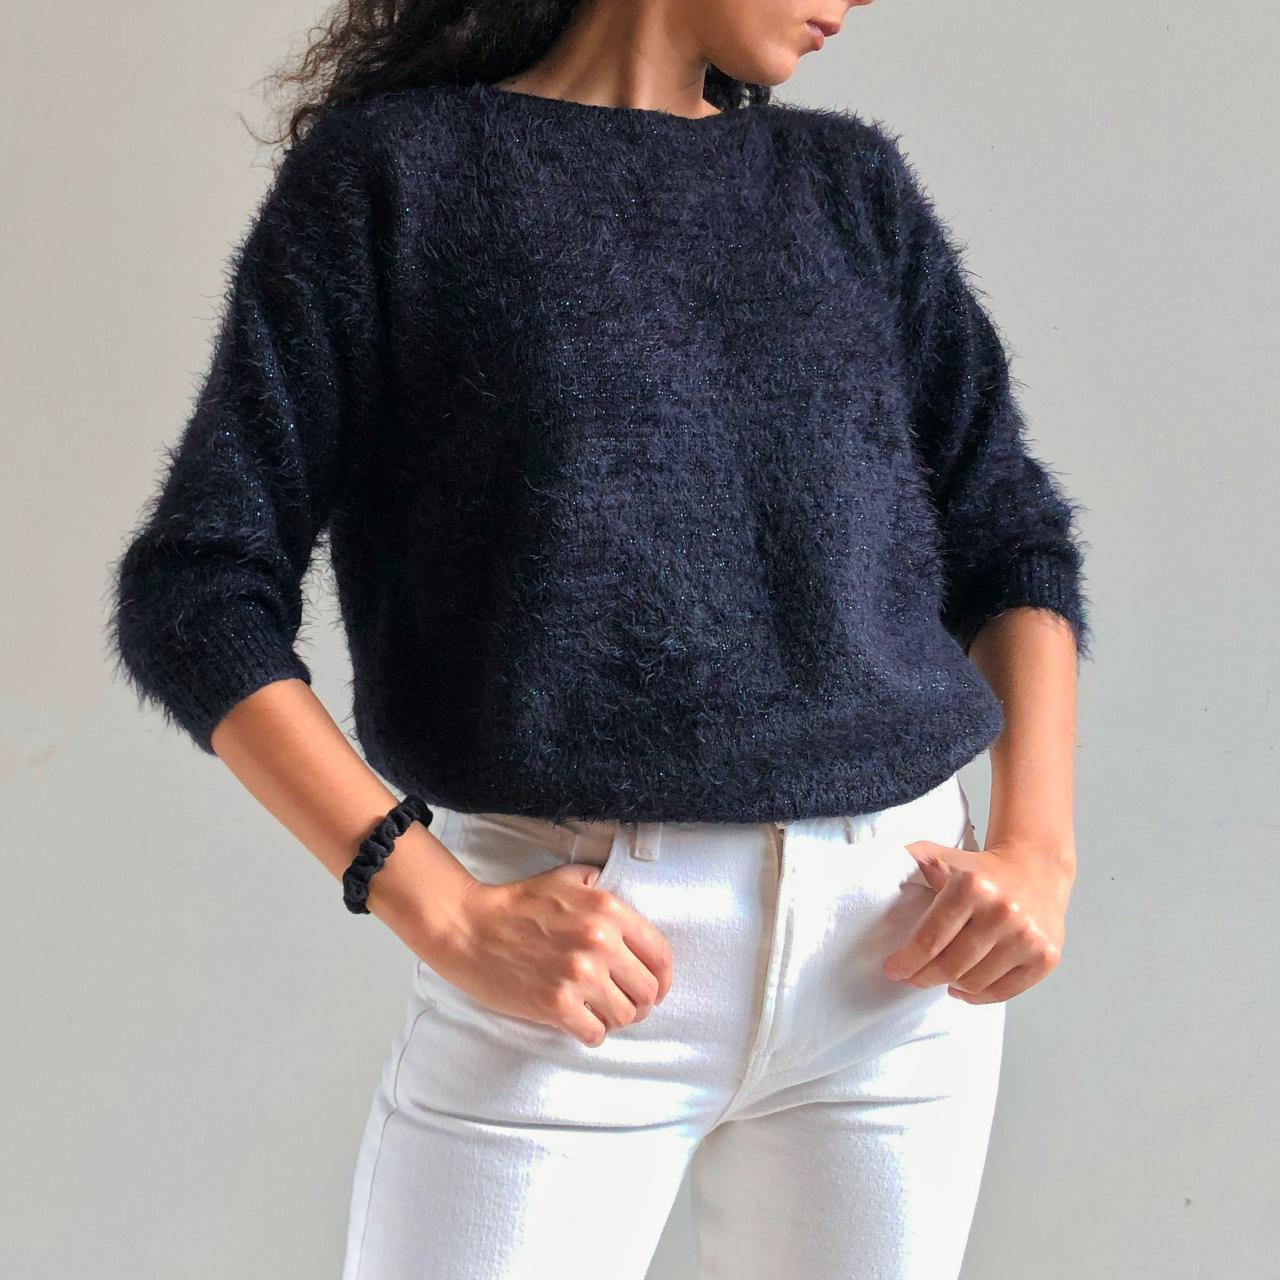 Product Image 1 - 80's style black sweater
oasis textured